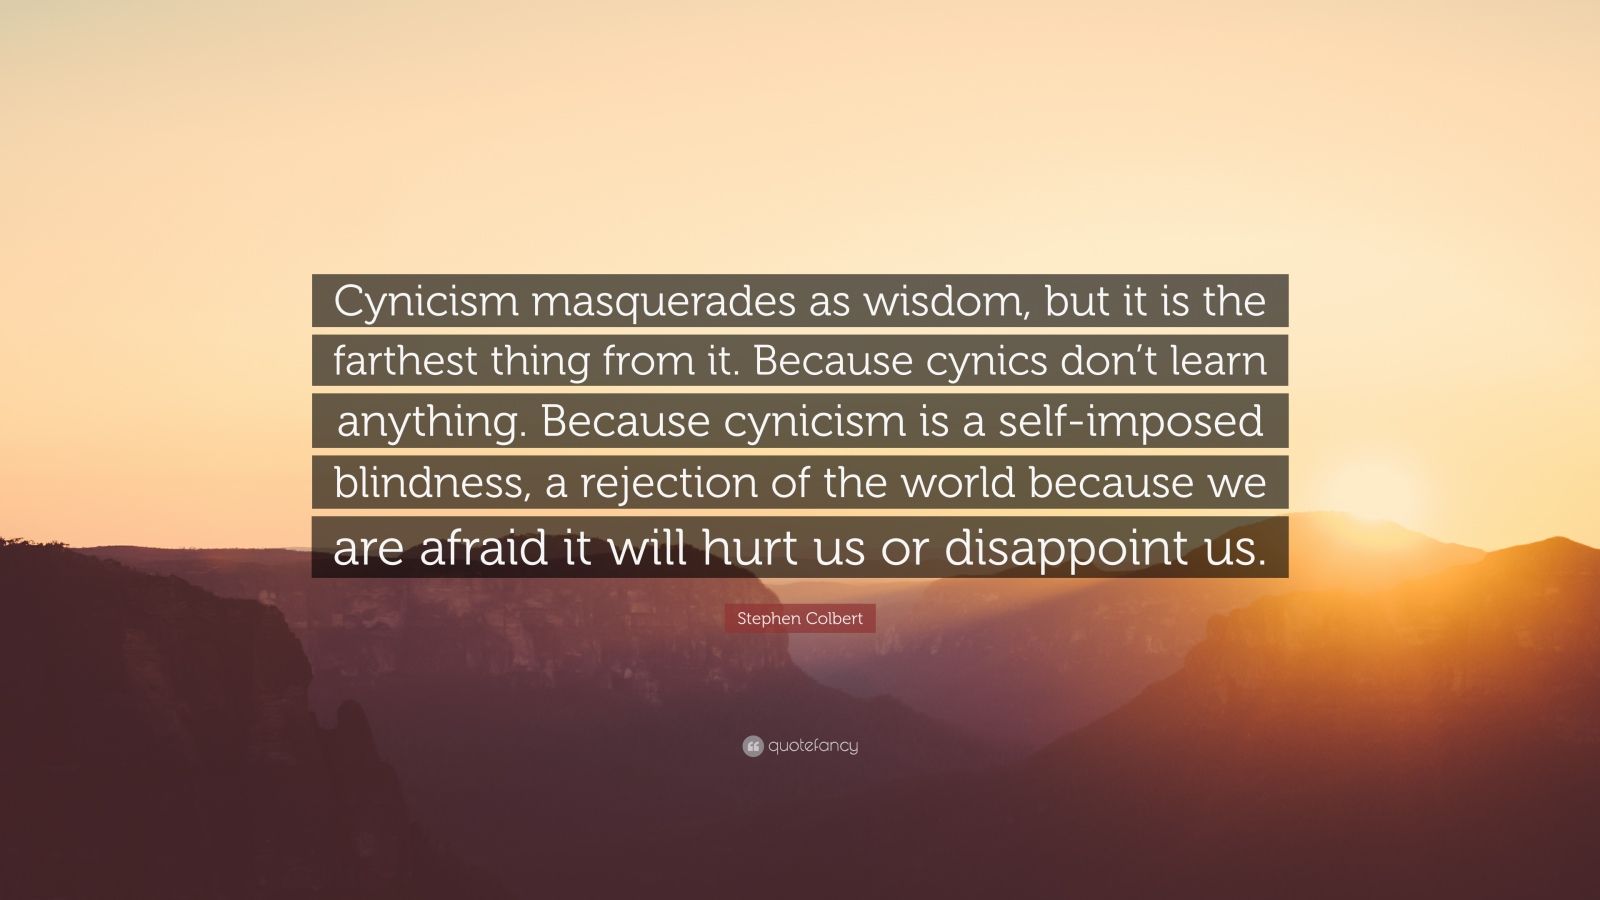 Stephen Colbert Quote: “Cynicism masquerades as wisdom, but it is the